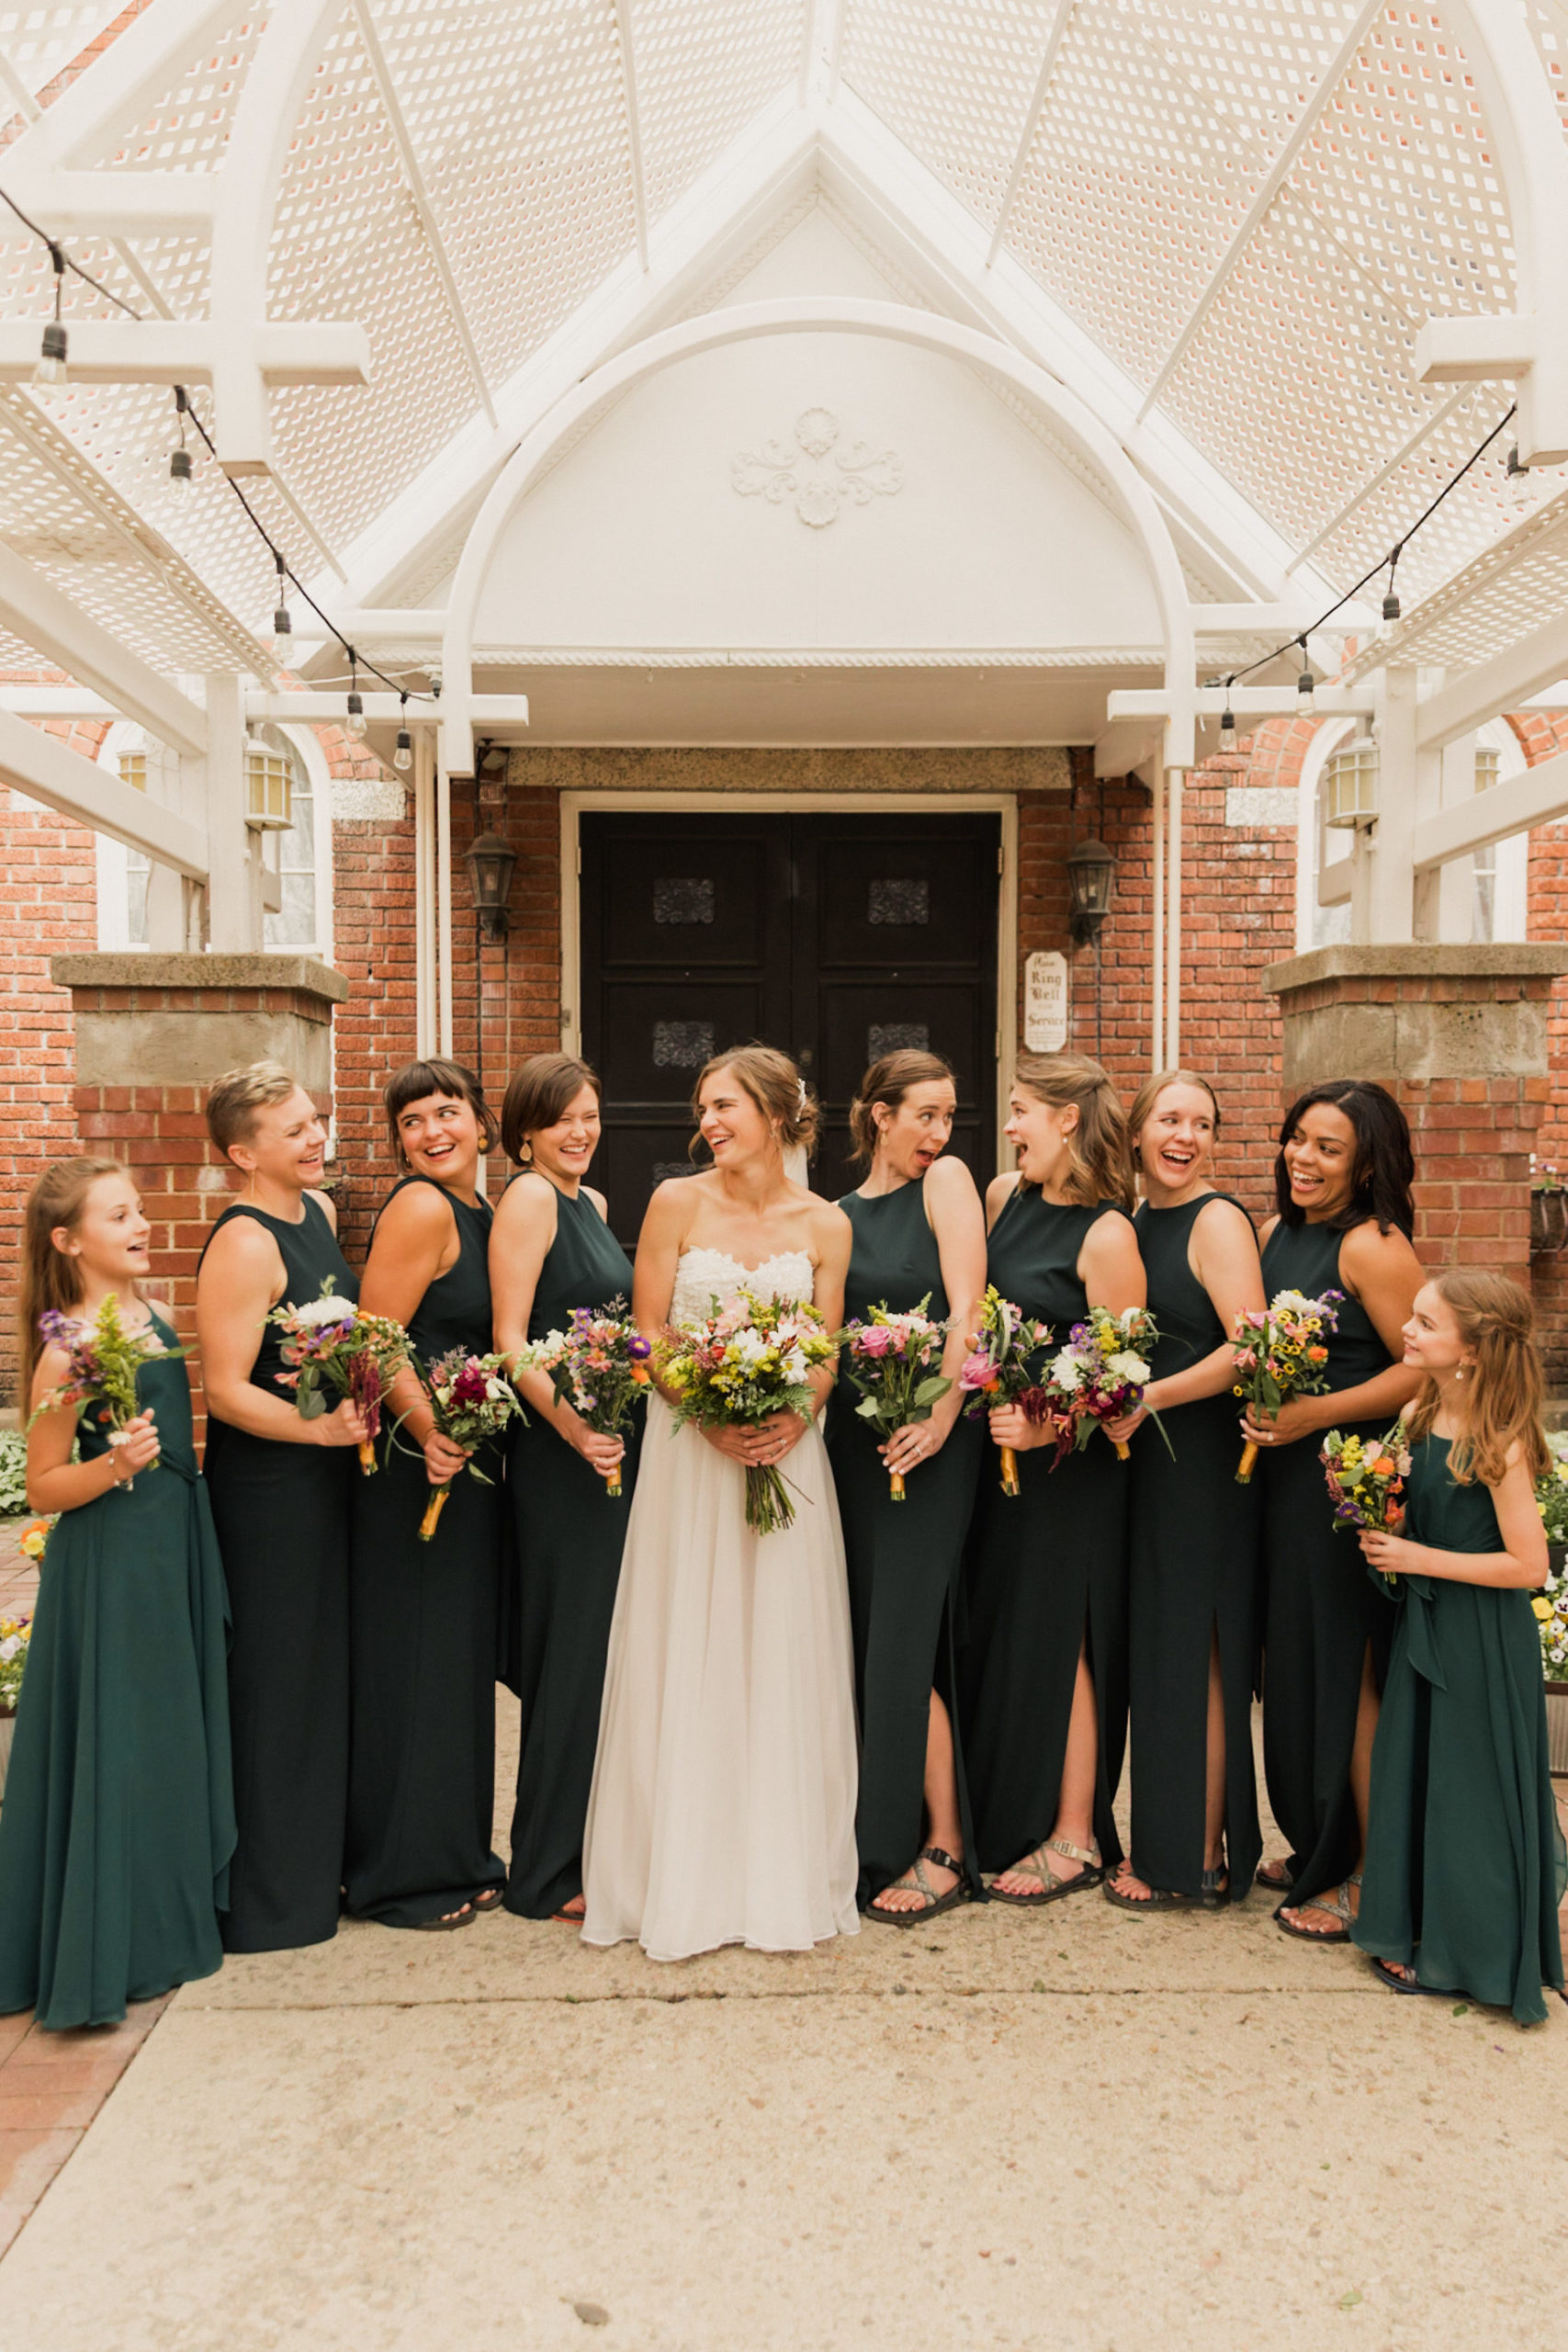 Getting Comfortable In Front of the Camera For Your Wedding Day: Bridesmaids with the bride smile and laugh as they think about how amazing the wedding day has gone so far.